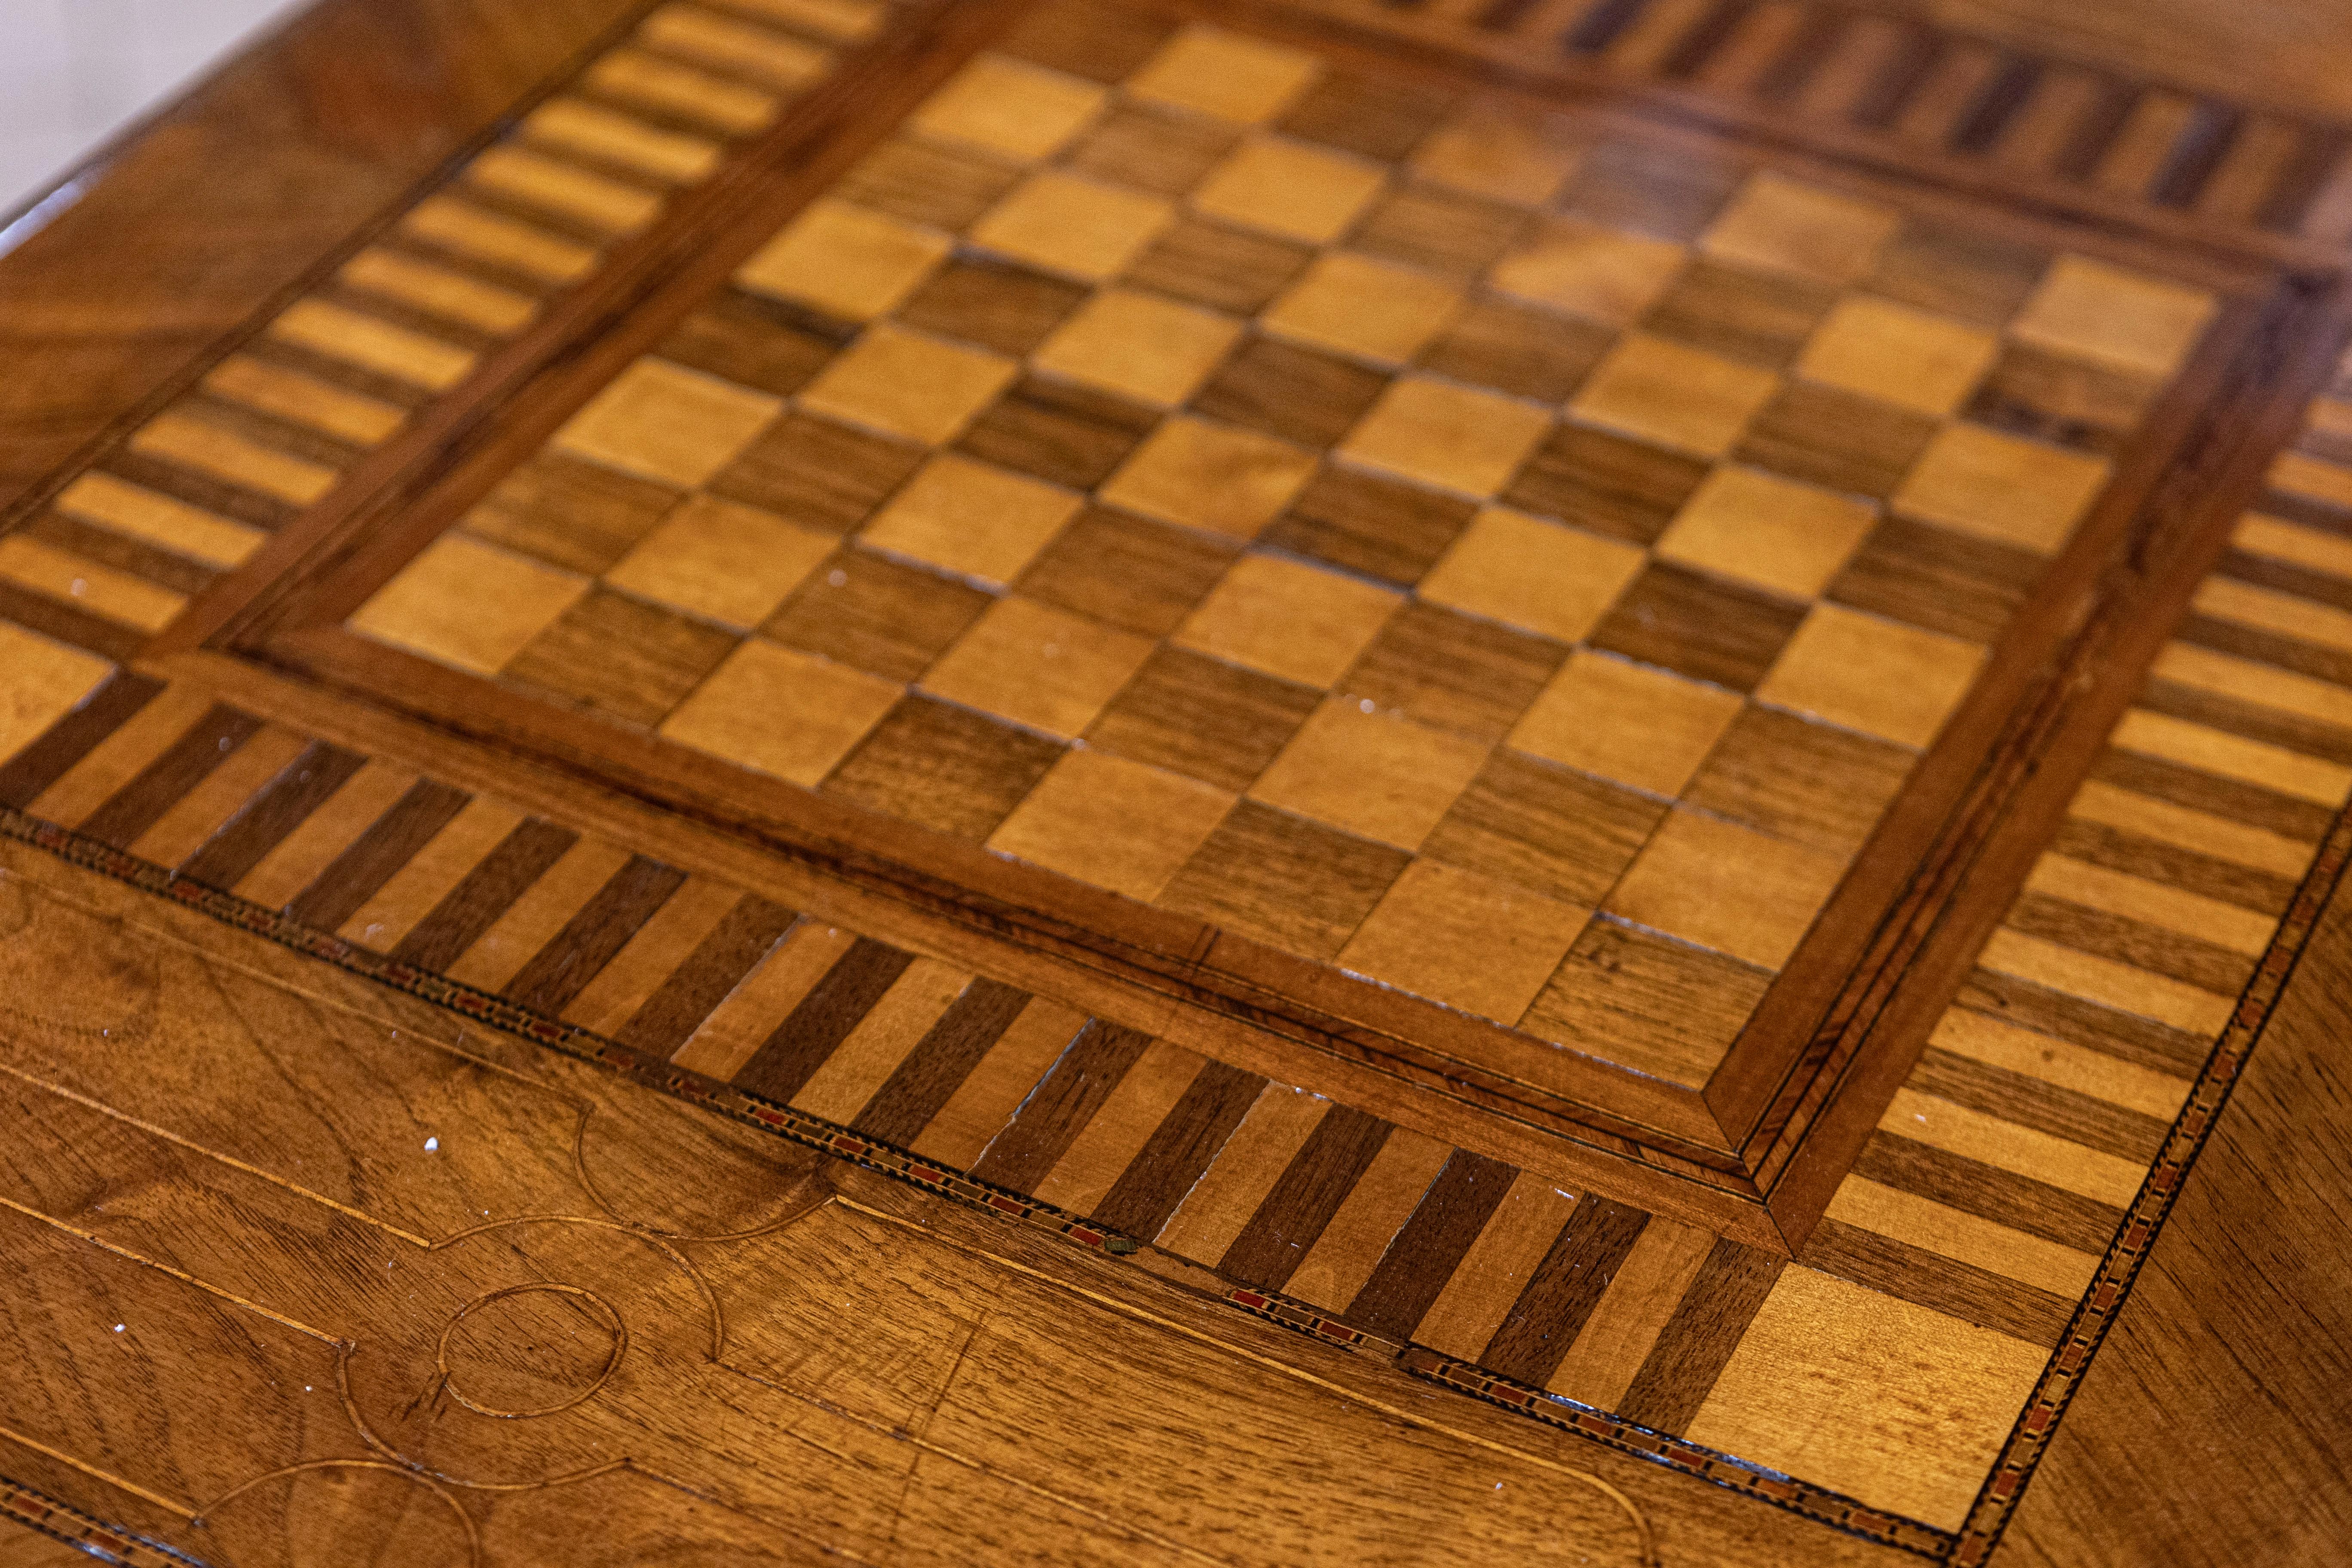 Italian 19th Century Walnut and Mahogany Game Table with Checkerboard Top For Sale 4